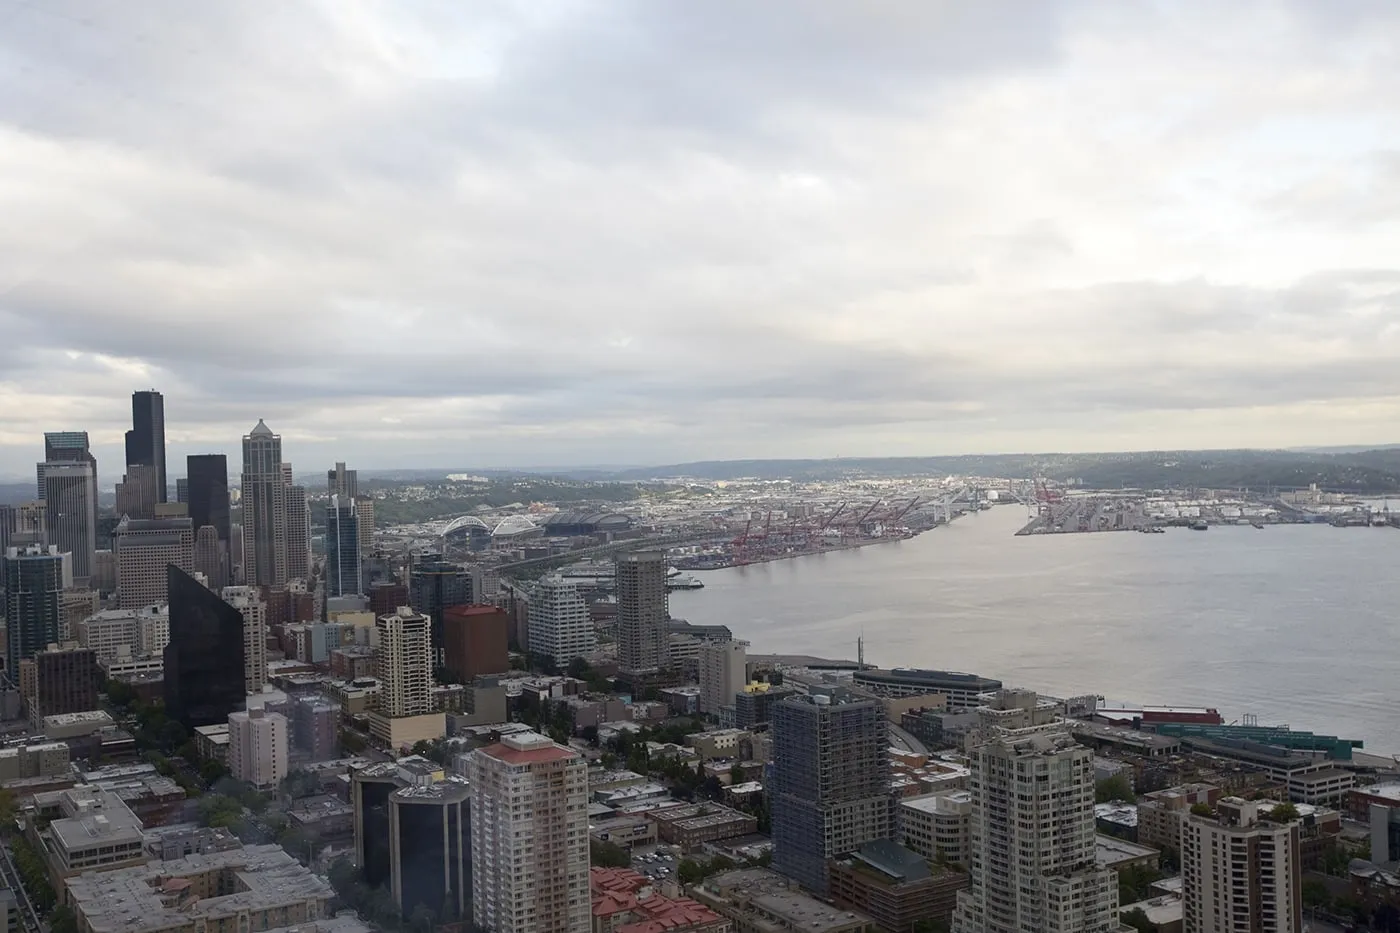 View from the Space Needle in Seattle, Washington.